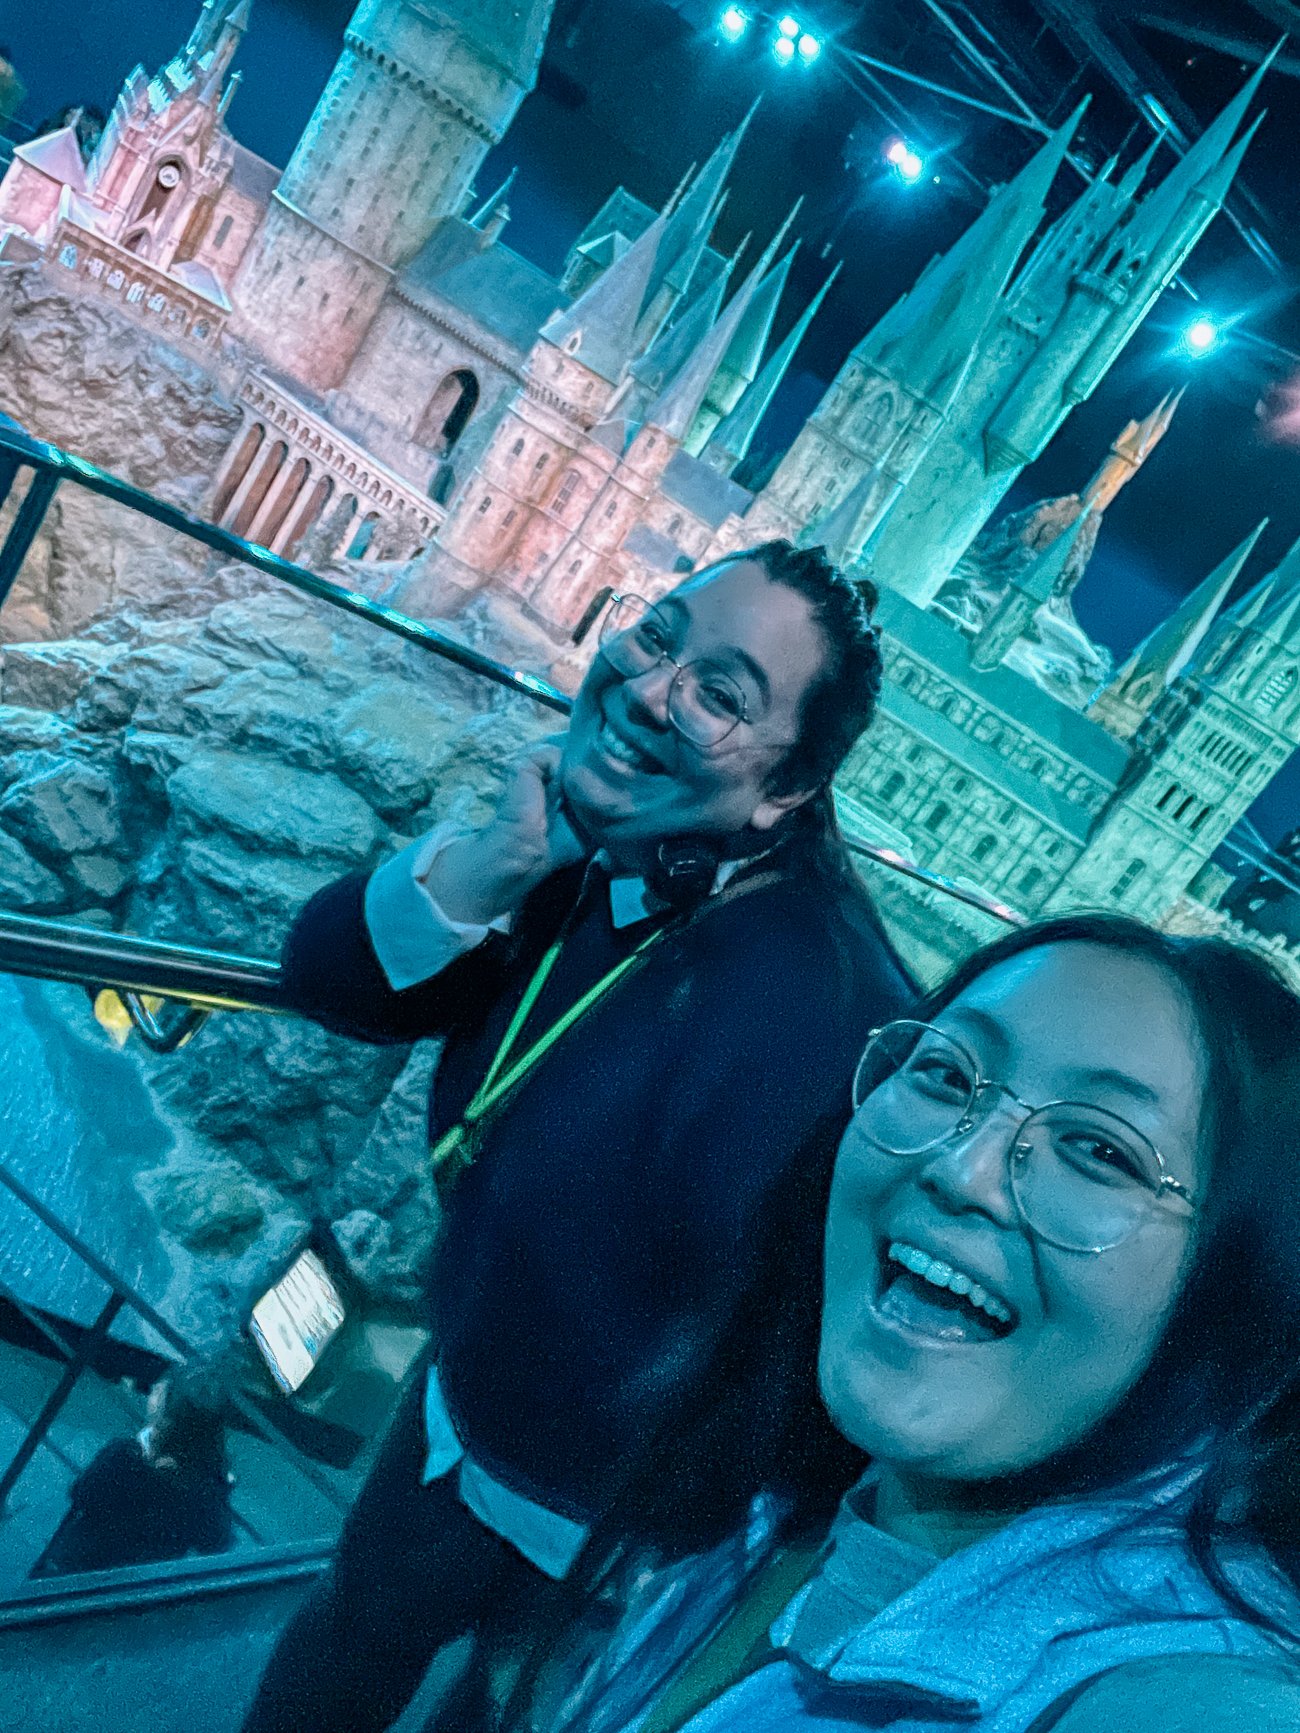 Kim and Kaitlin in front of Hogwarts castle diorama in blue evening light